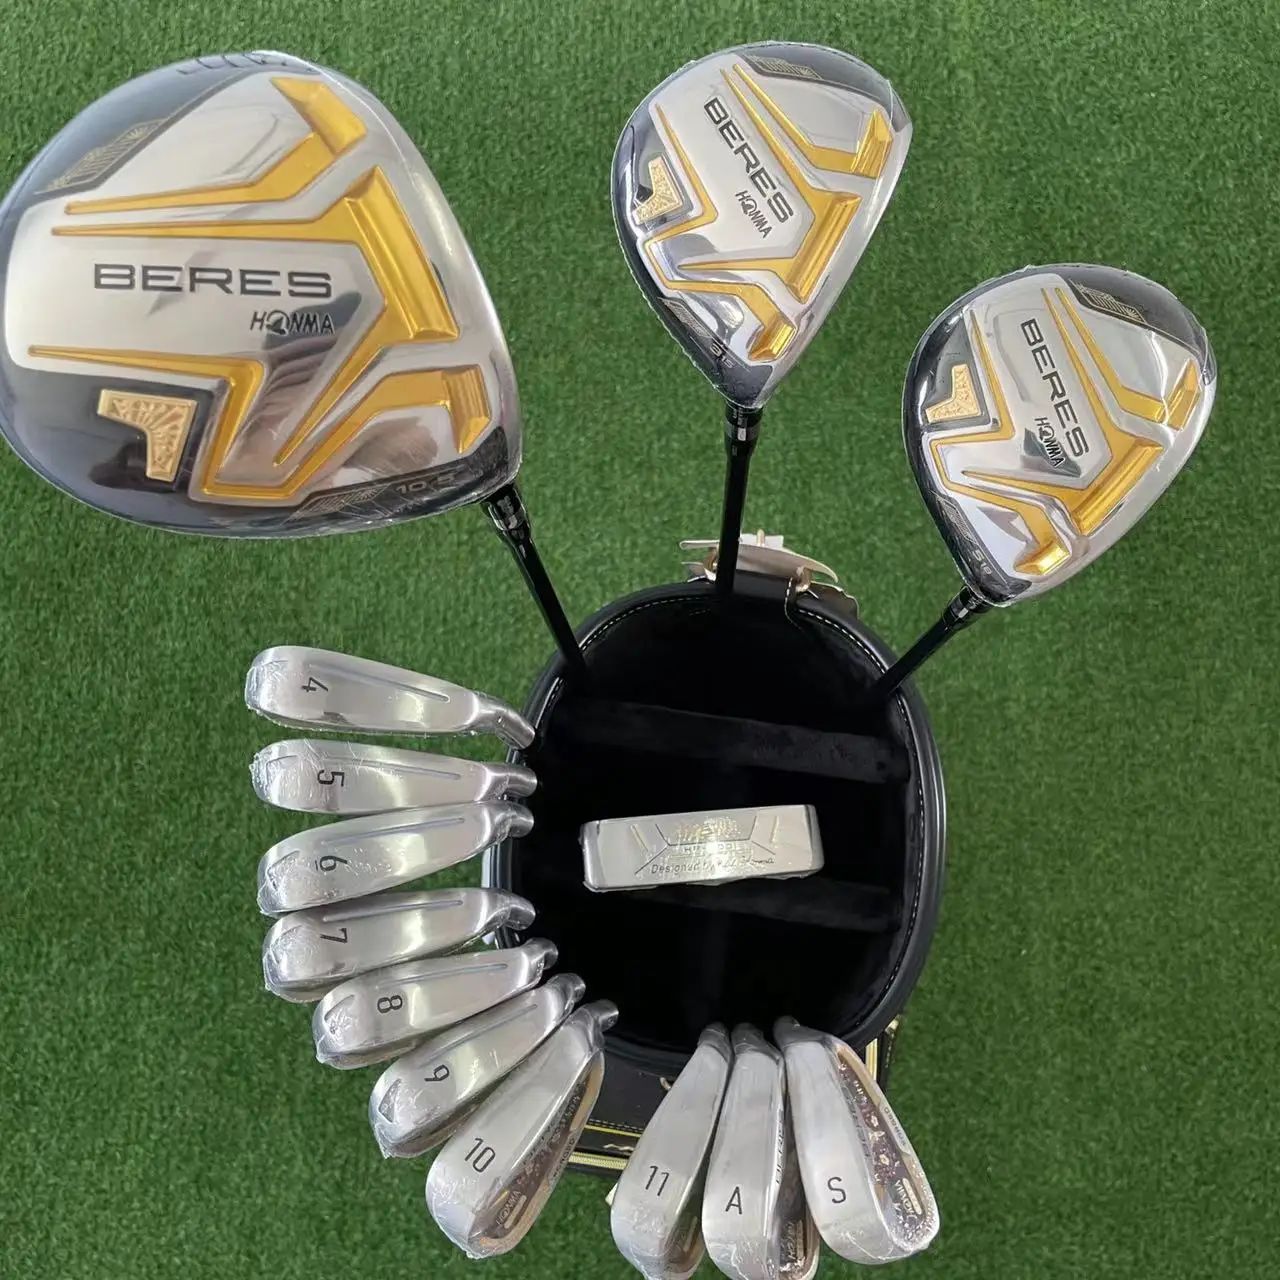 

2023 New Golf Clubs Honma IS-08 Complete Set 10.5 Driver+ 3/15 5/18 Fairway Wood+Putter+Irons Graphite Shaft With Headcover